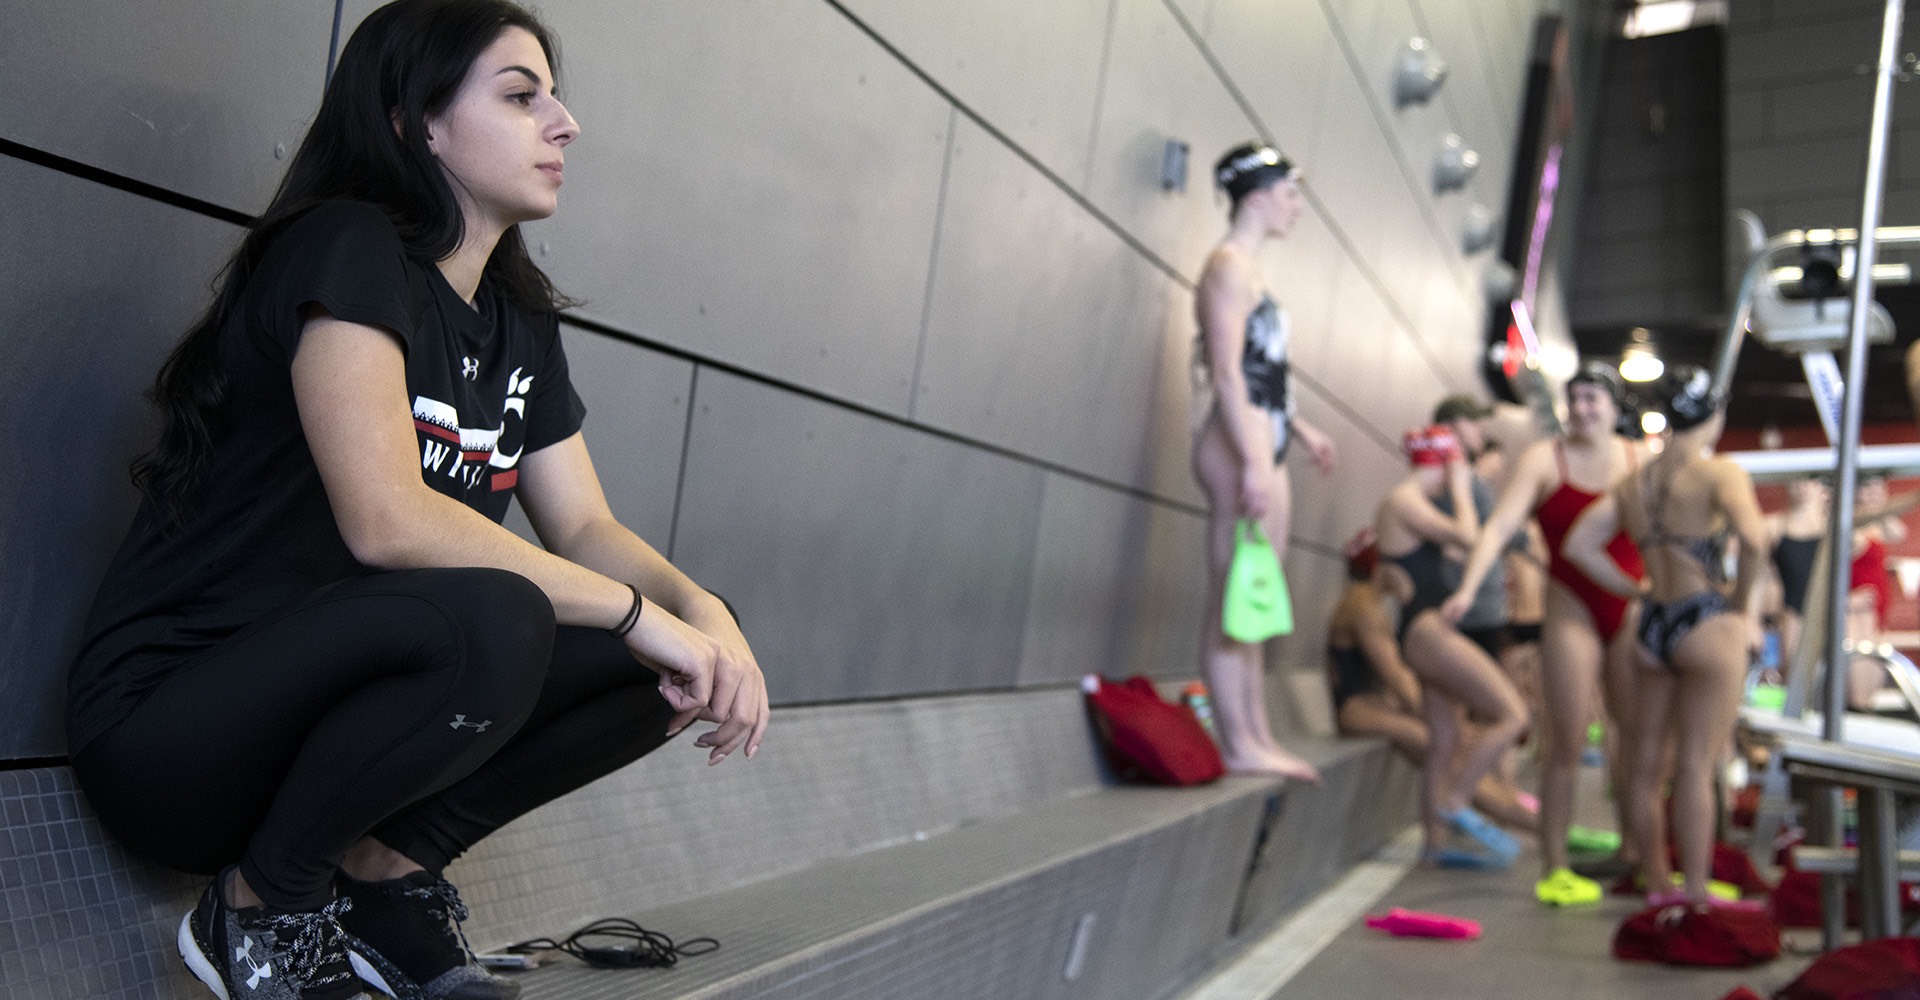 Sink or Swim- Enna Selmanovic was only a sophomore when her sport - and her identity - were unexpectedly ripped away.  She had to choose: Wallow or find a new way to win. (NCAA)